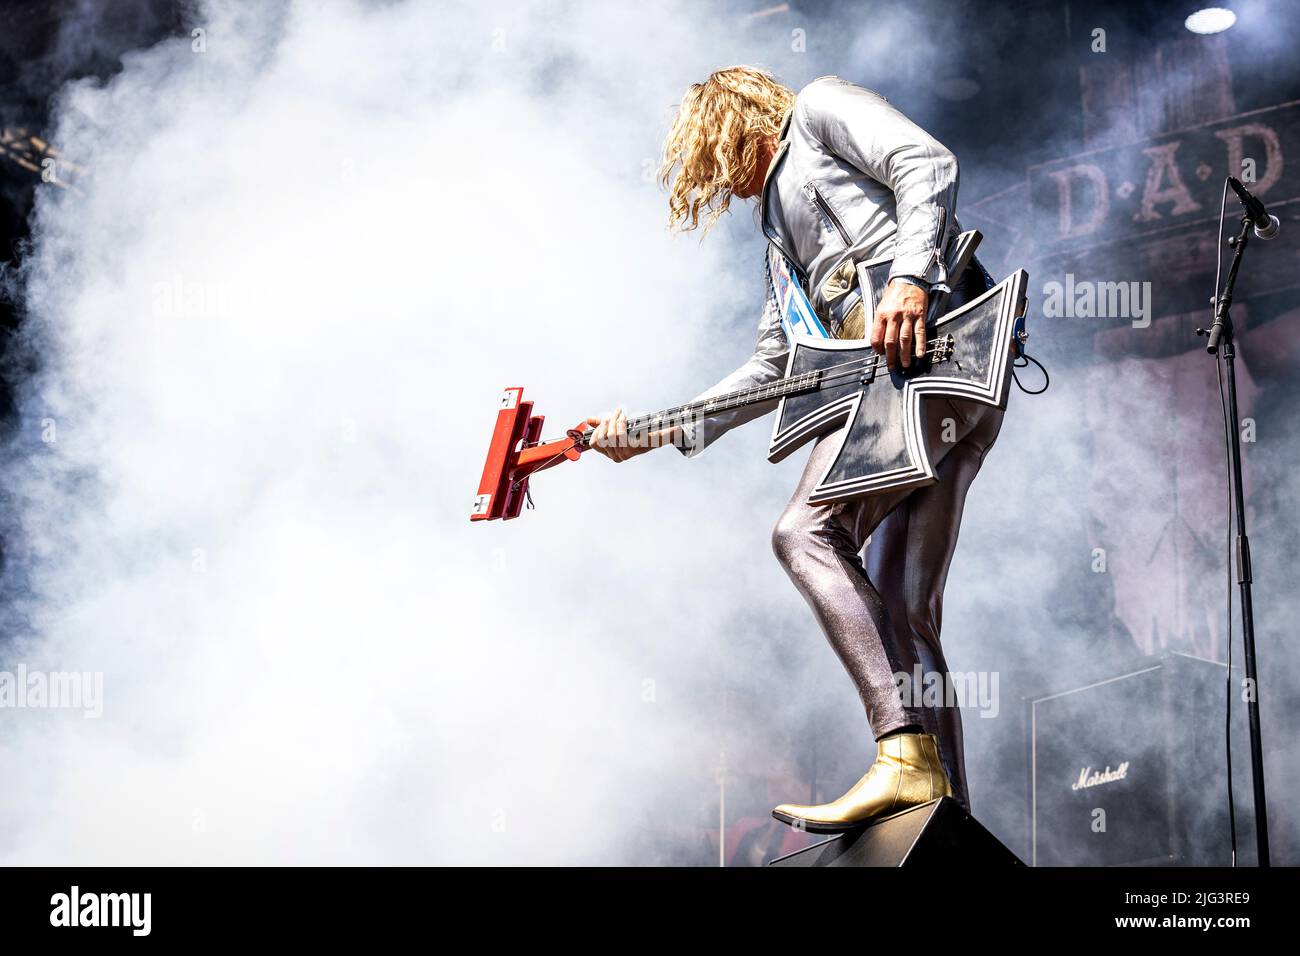 Oslo, Norway. 24th, June 2022. The Danish rock band D-A-D performs a live concert during the Norwegian music festival Tons of Rock 2022 in Oslo. Here bass player Stig Pedersen is seen live on stage. (Photo credit: Gonzales Photo - Terje Dokken). Stock Photo